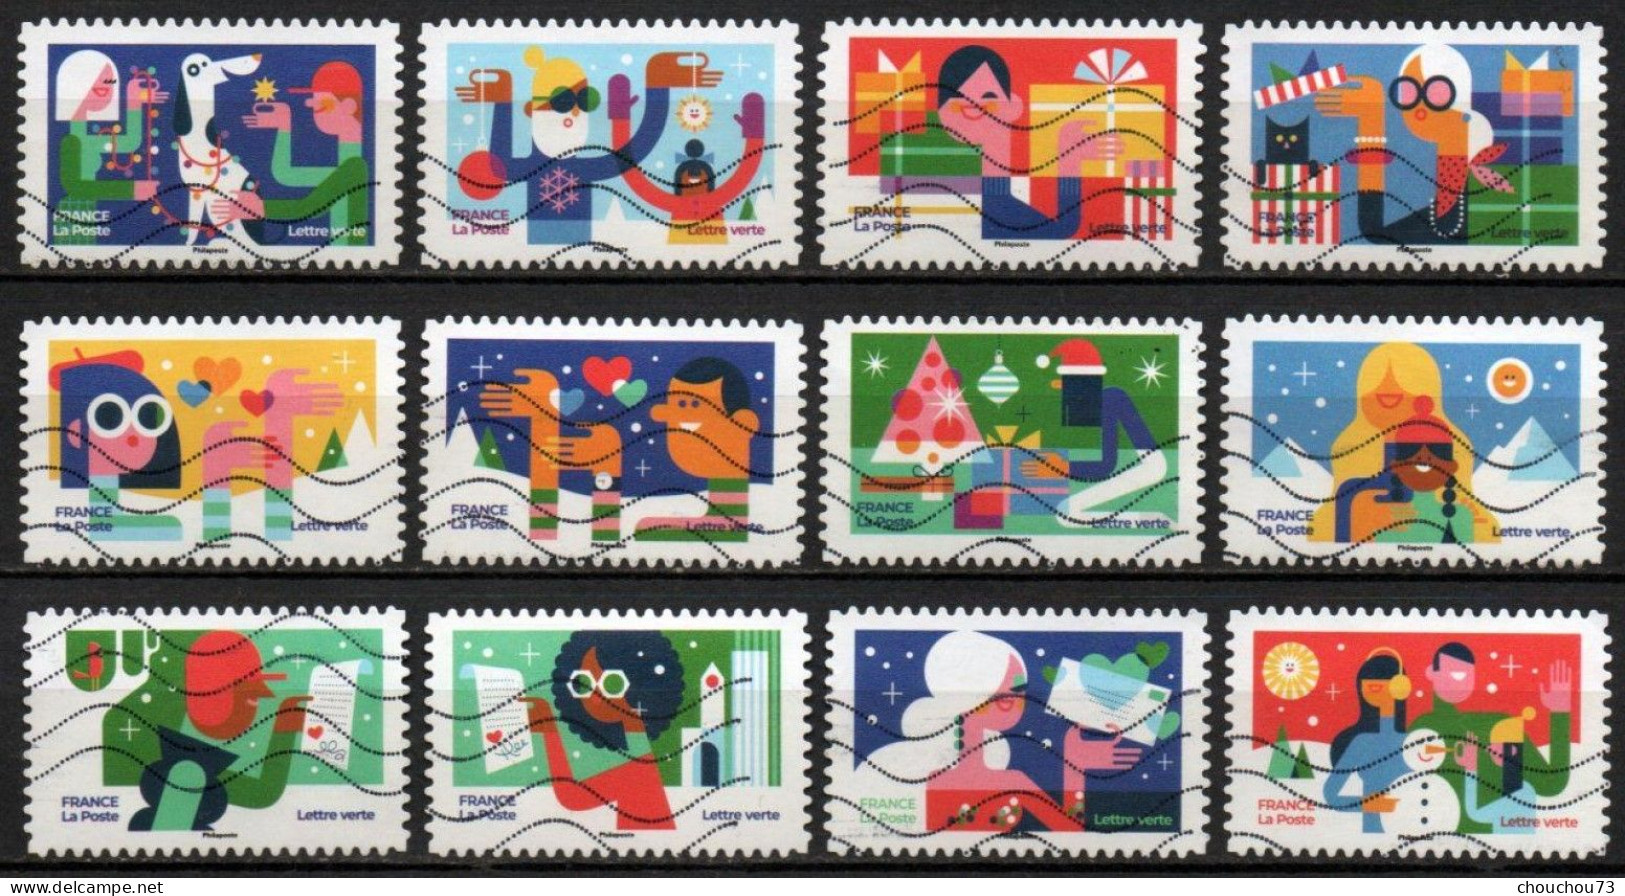 FRANCE AUTOADHESIFS 12 TIMBRES OBLITERES -N° YVERT 2XXX A 2XXXX-ANNEE 2023-DES TIMBRES QUI NOUS RAPPROCHENT-NOEL 2023 - Used Stamps